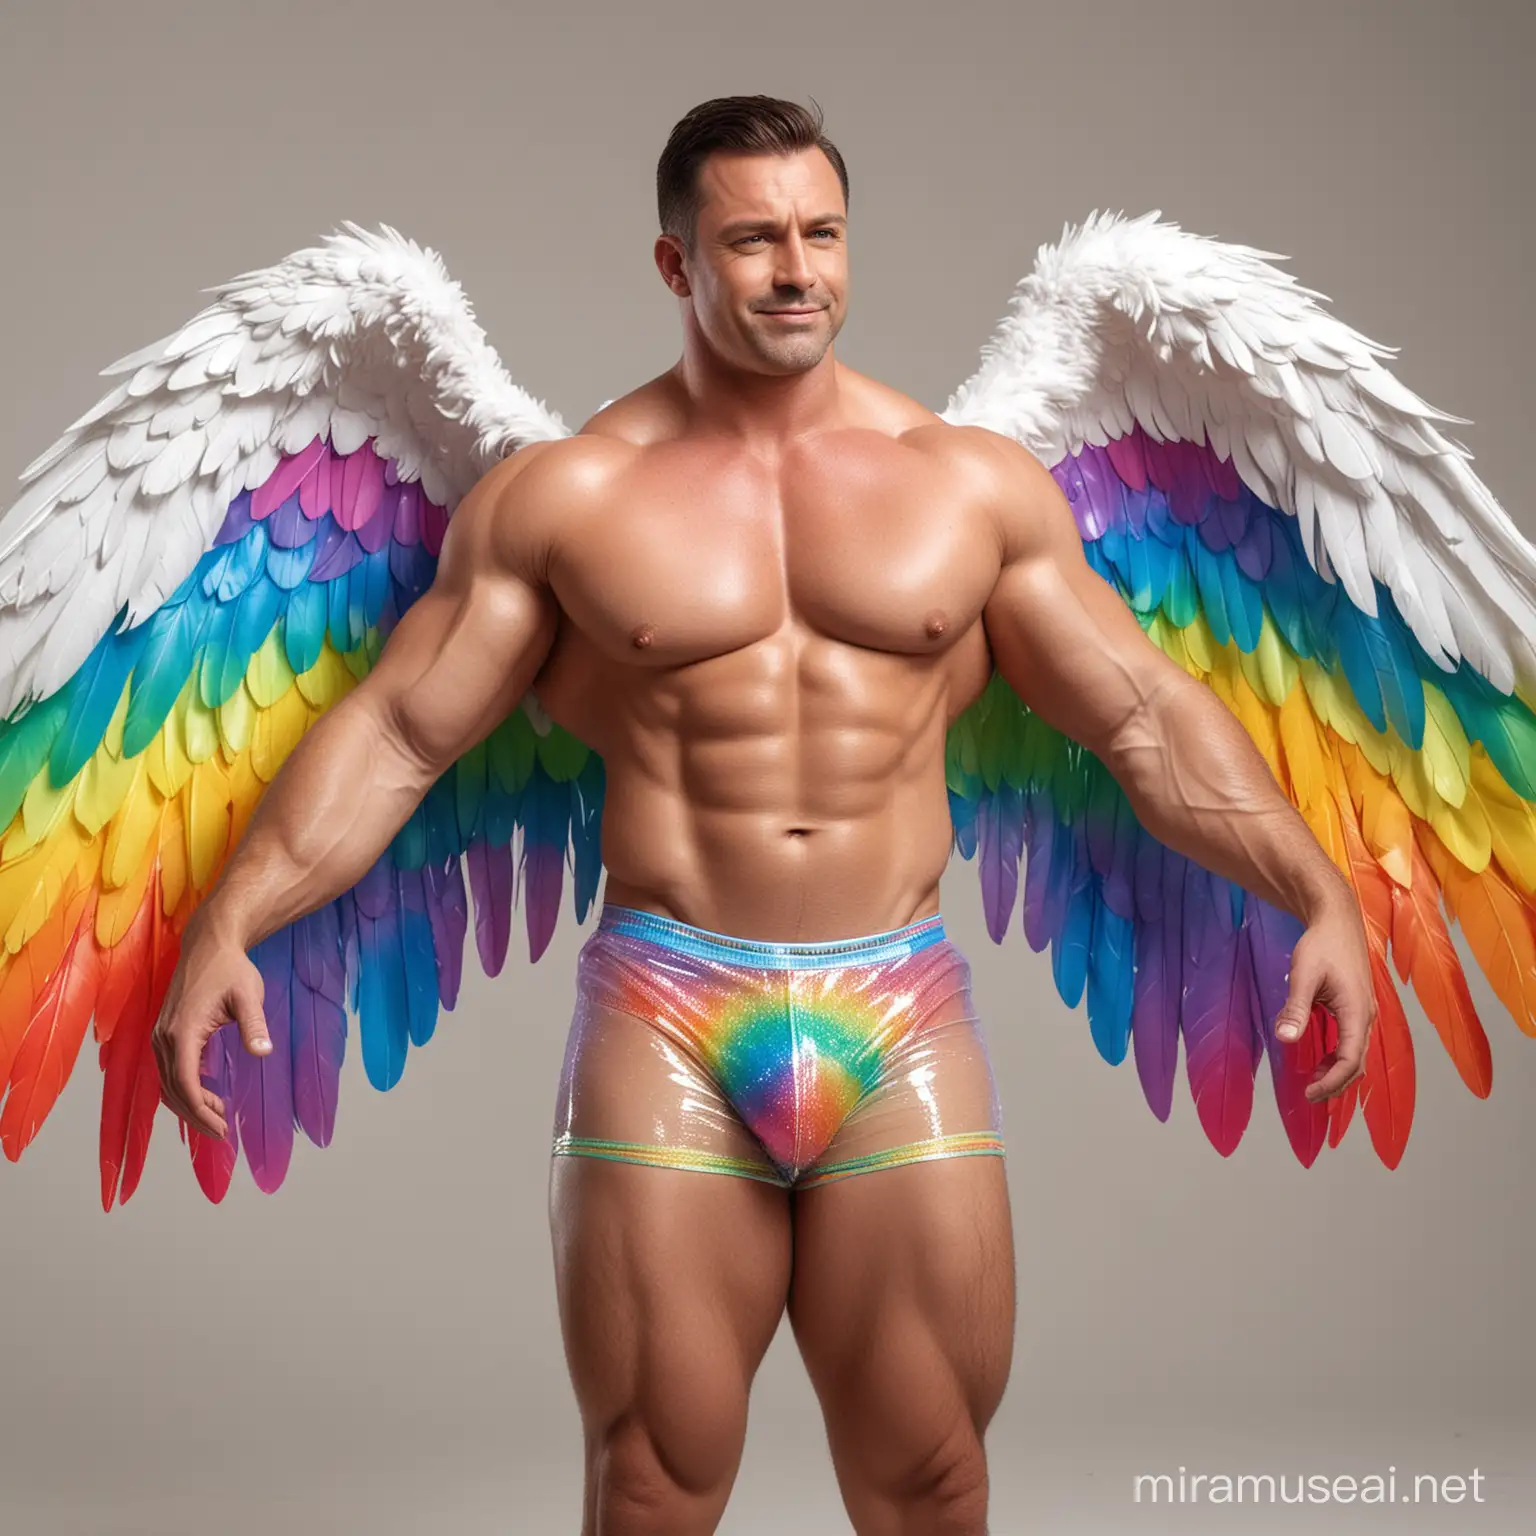 Studio Light Topless 30s Ultra Chunky Bodybuilder Daddy Wearing Multi-Highlighter Bright Rainbow Colored See Through Huge Eagle Wings Shoulder Jacket short shorts and Up Flexing his Big Strong Arm Up with Doraemon